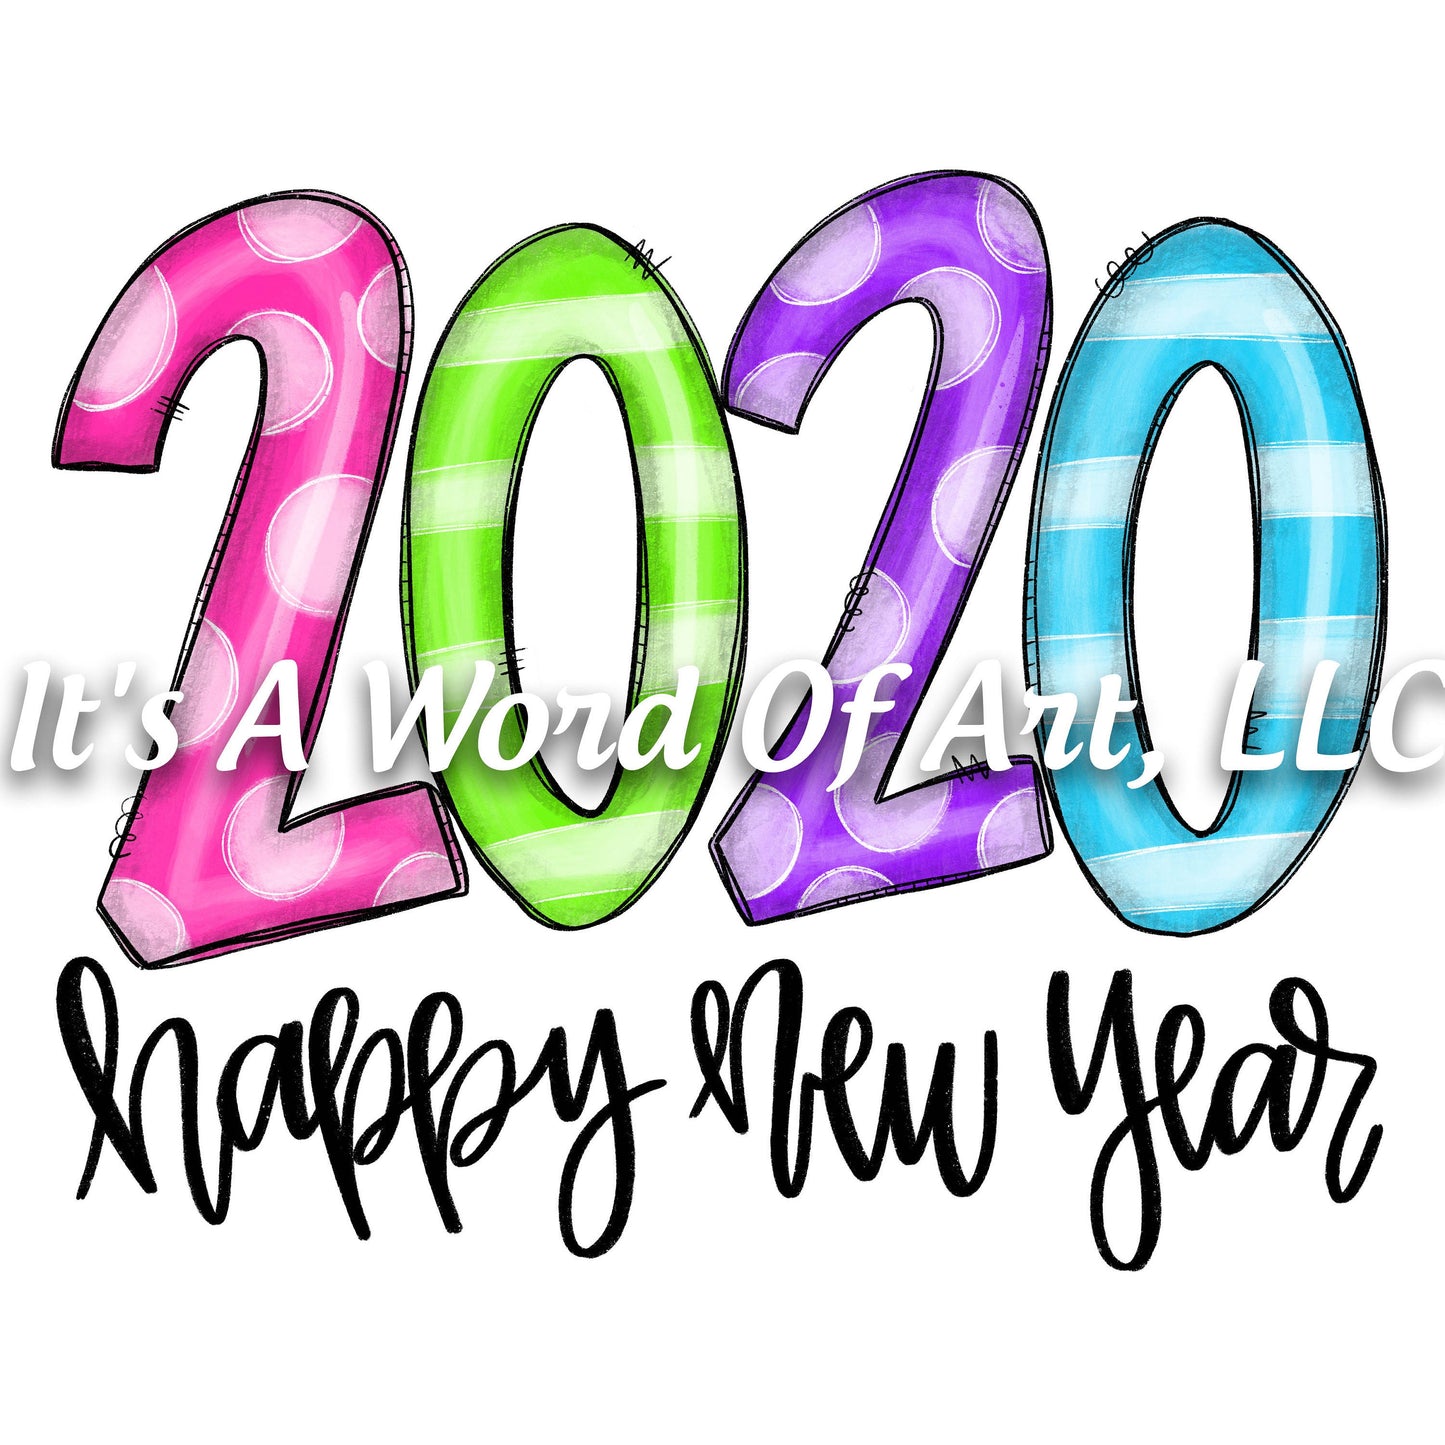 New Years 13 - Happy New Year 2020 - Sublimation Transfer Set/Ready To Press Sublimation Transfer/Sublimation Transfer